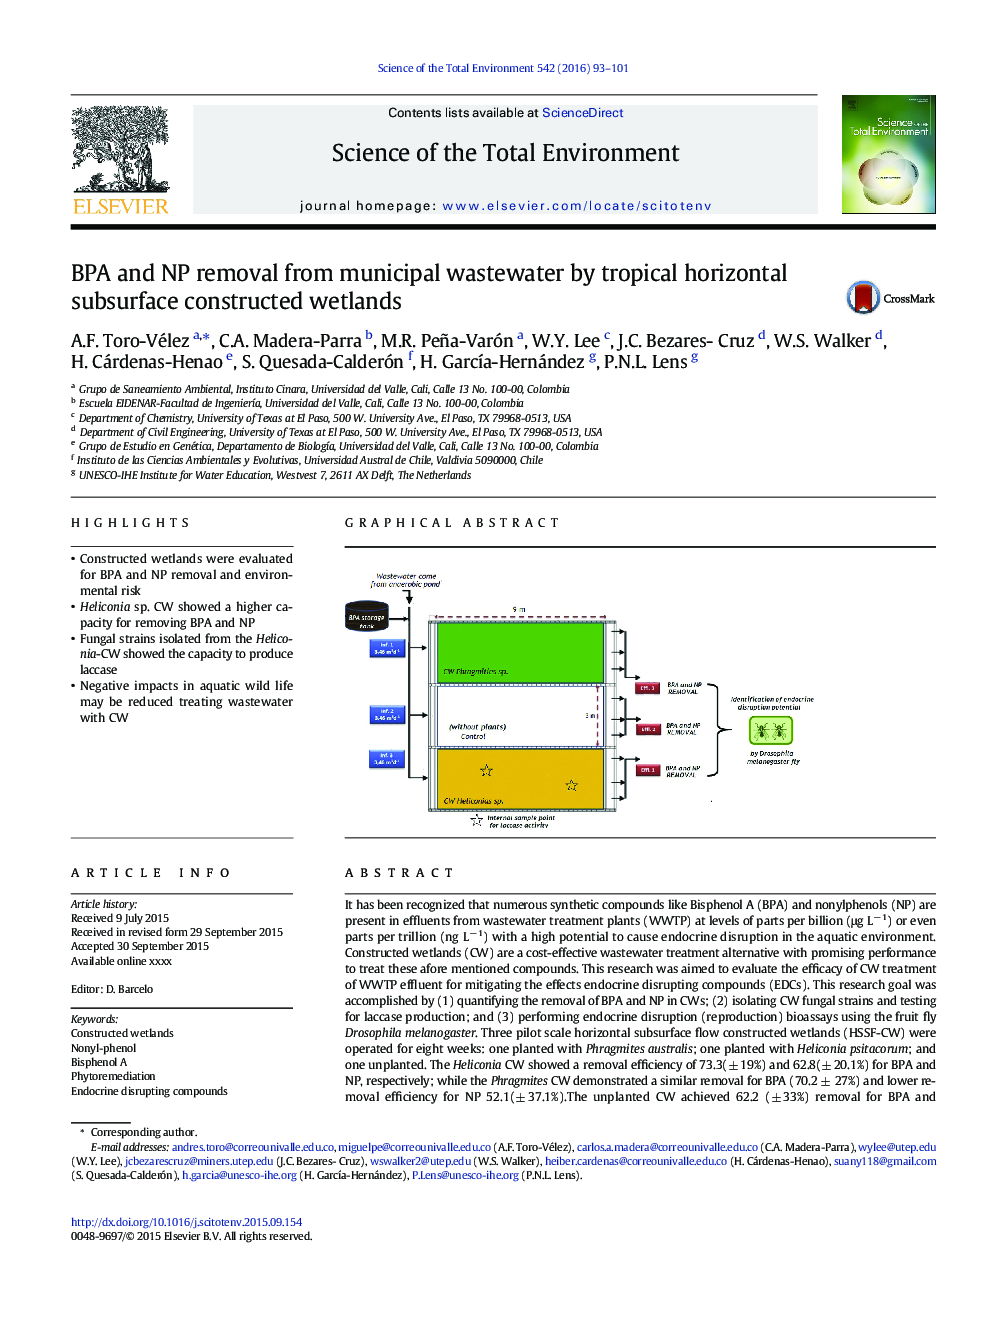 BPA and NP removal from municipal wastewater by tropical horizontal subsurface constructed wetlands